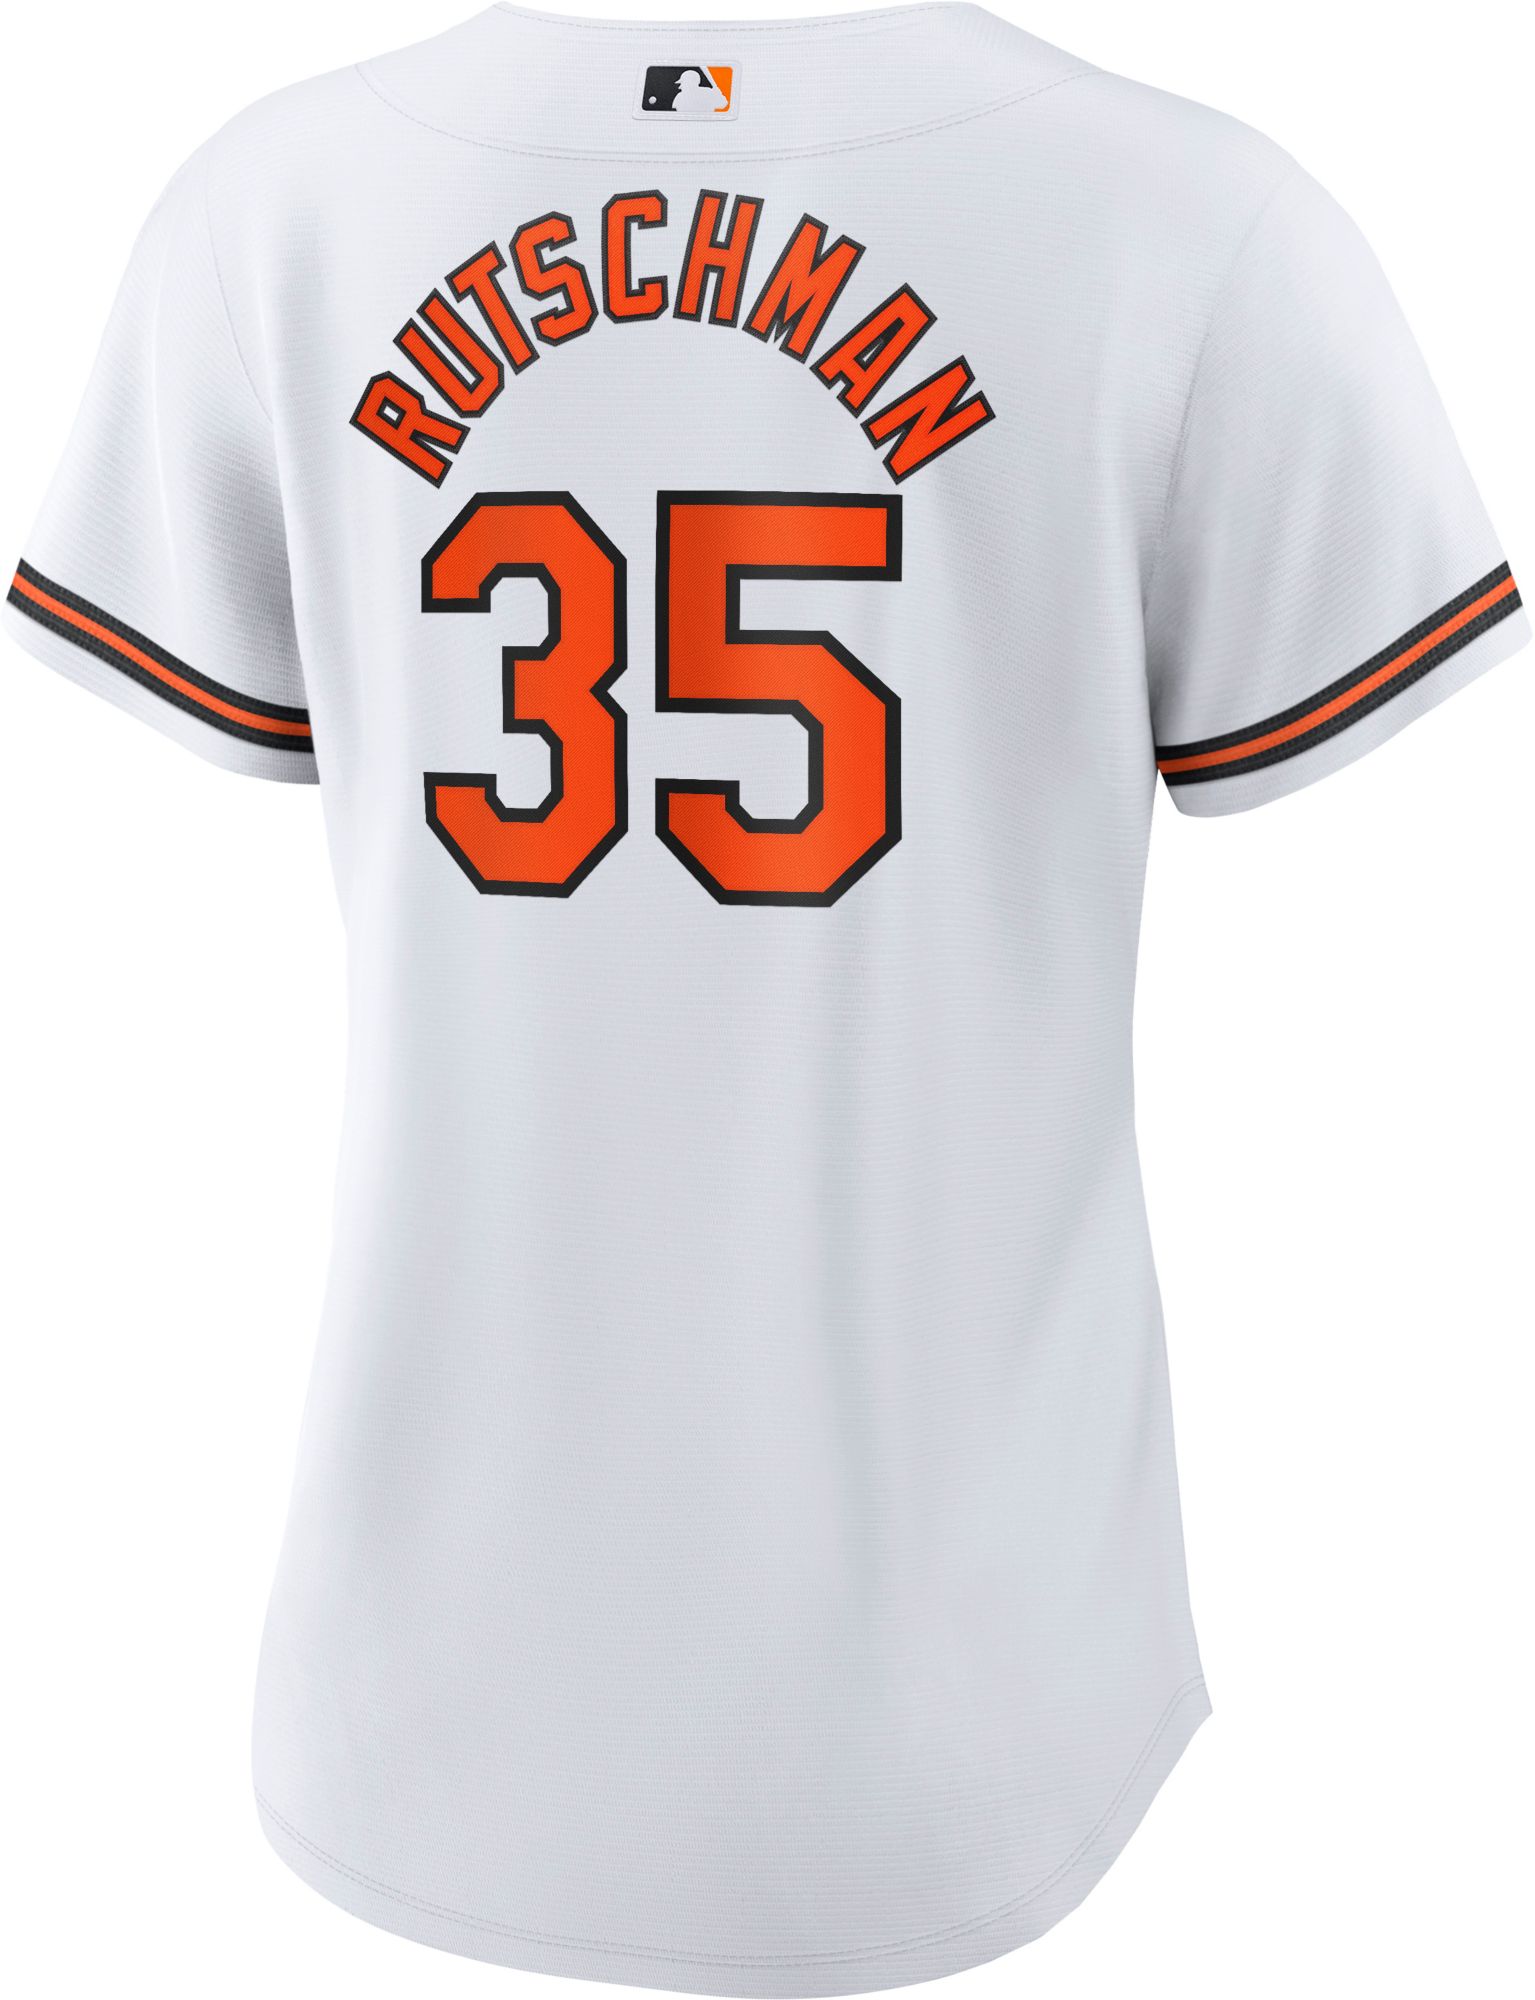 Orioles cool base jersey